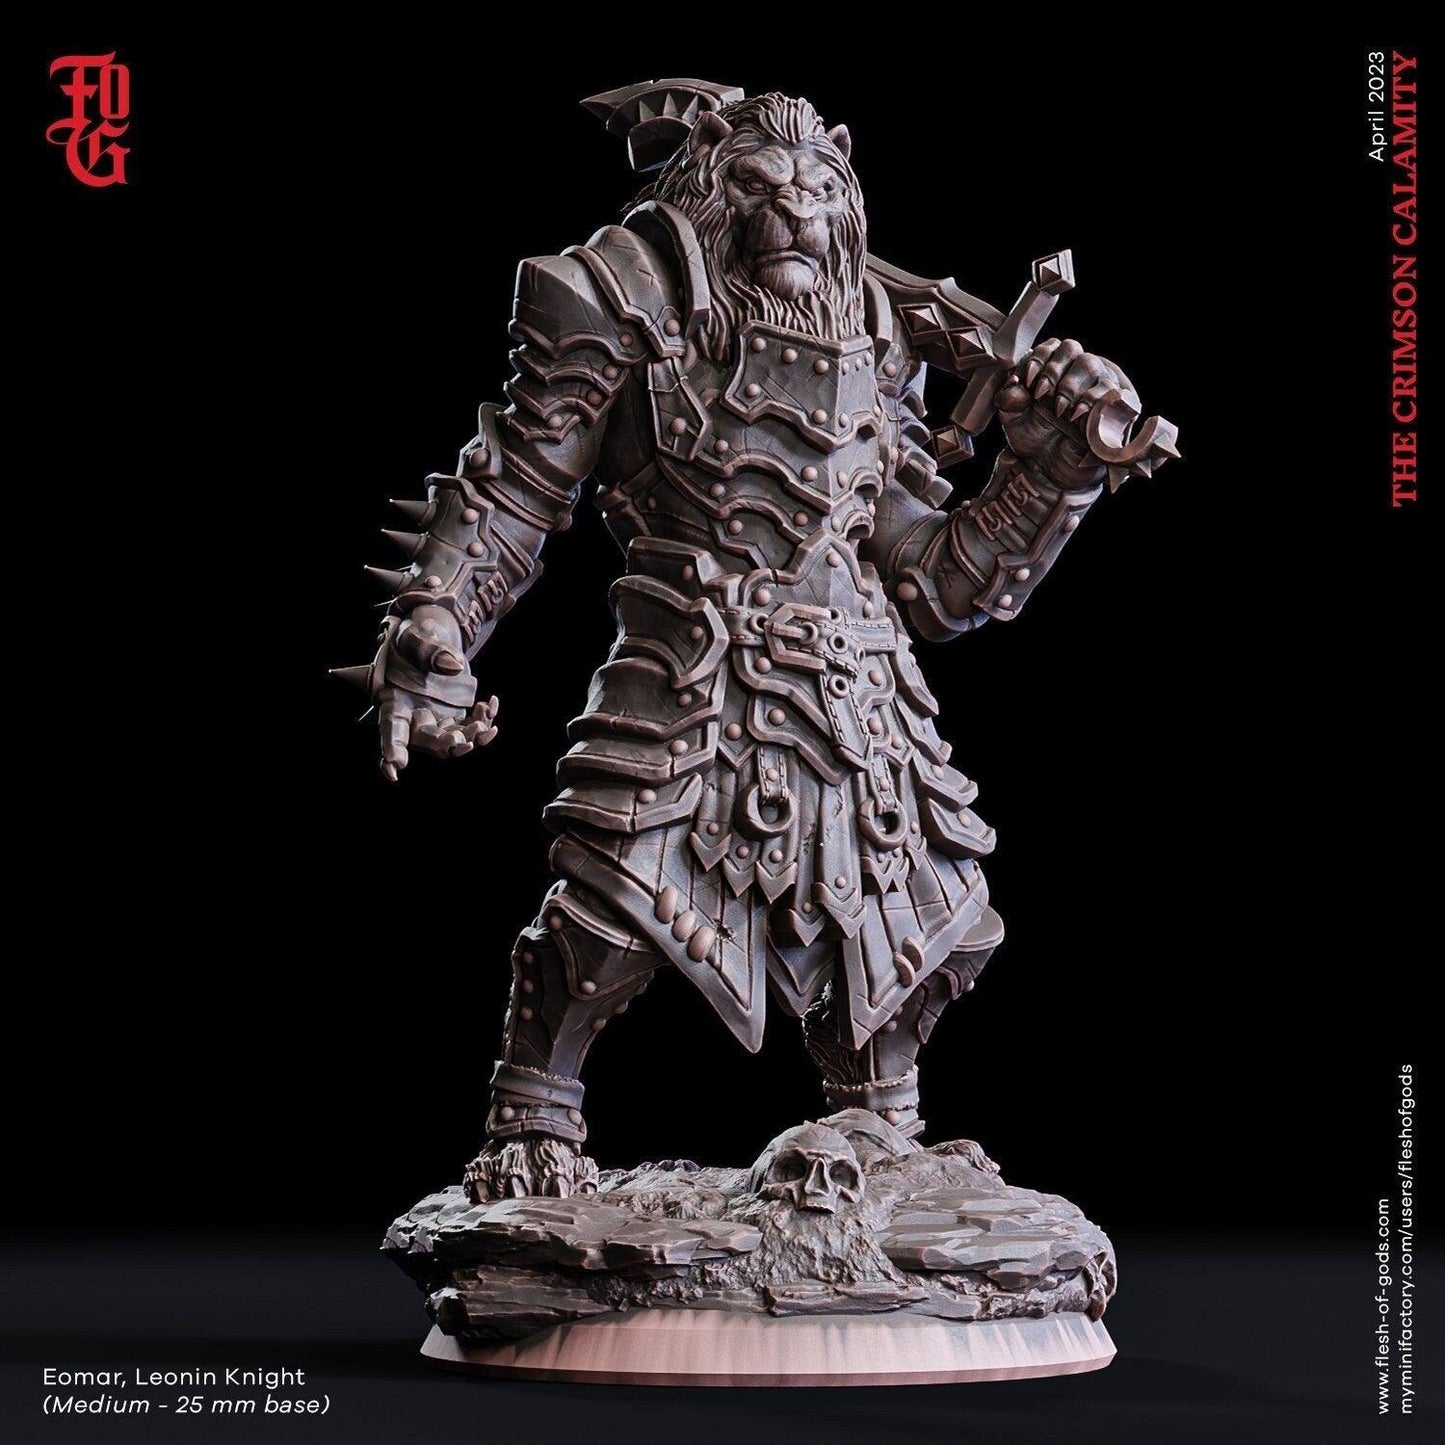 DnD Leonin Knight Beast Warrior Miniature | 25mm Base 75mm Scale and Bust | DnD Miniature Dungeons and Dragons DnD 5e fighter Lion paladin - Plague Miniatures shop for DnD Miniatures